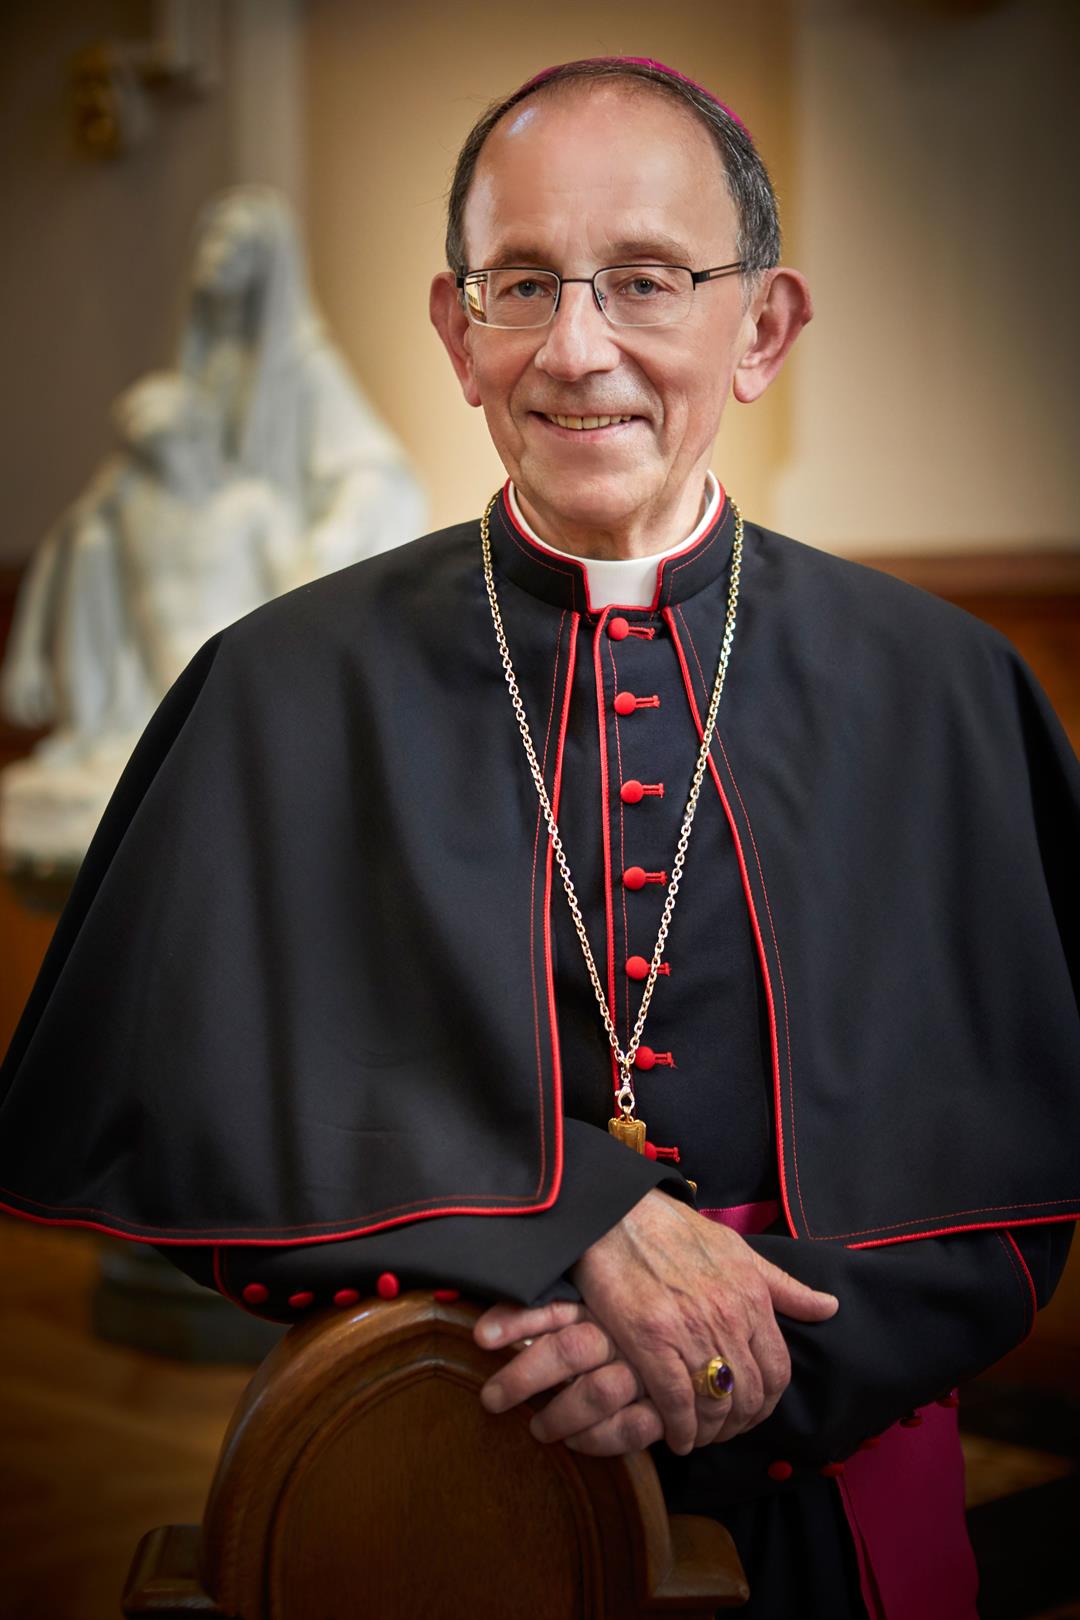 Diocese of Erie Announce Hospitalization of Bishop Lawrence Persico